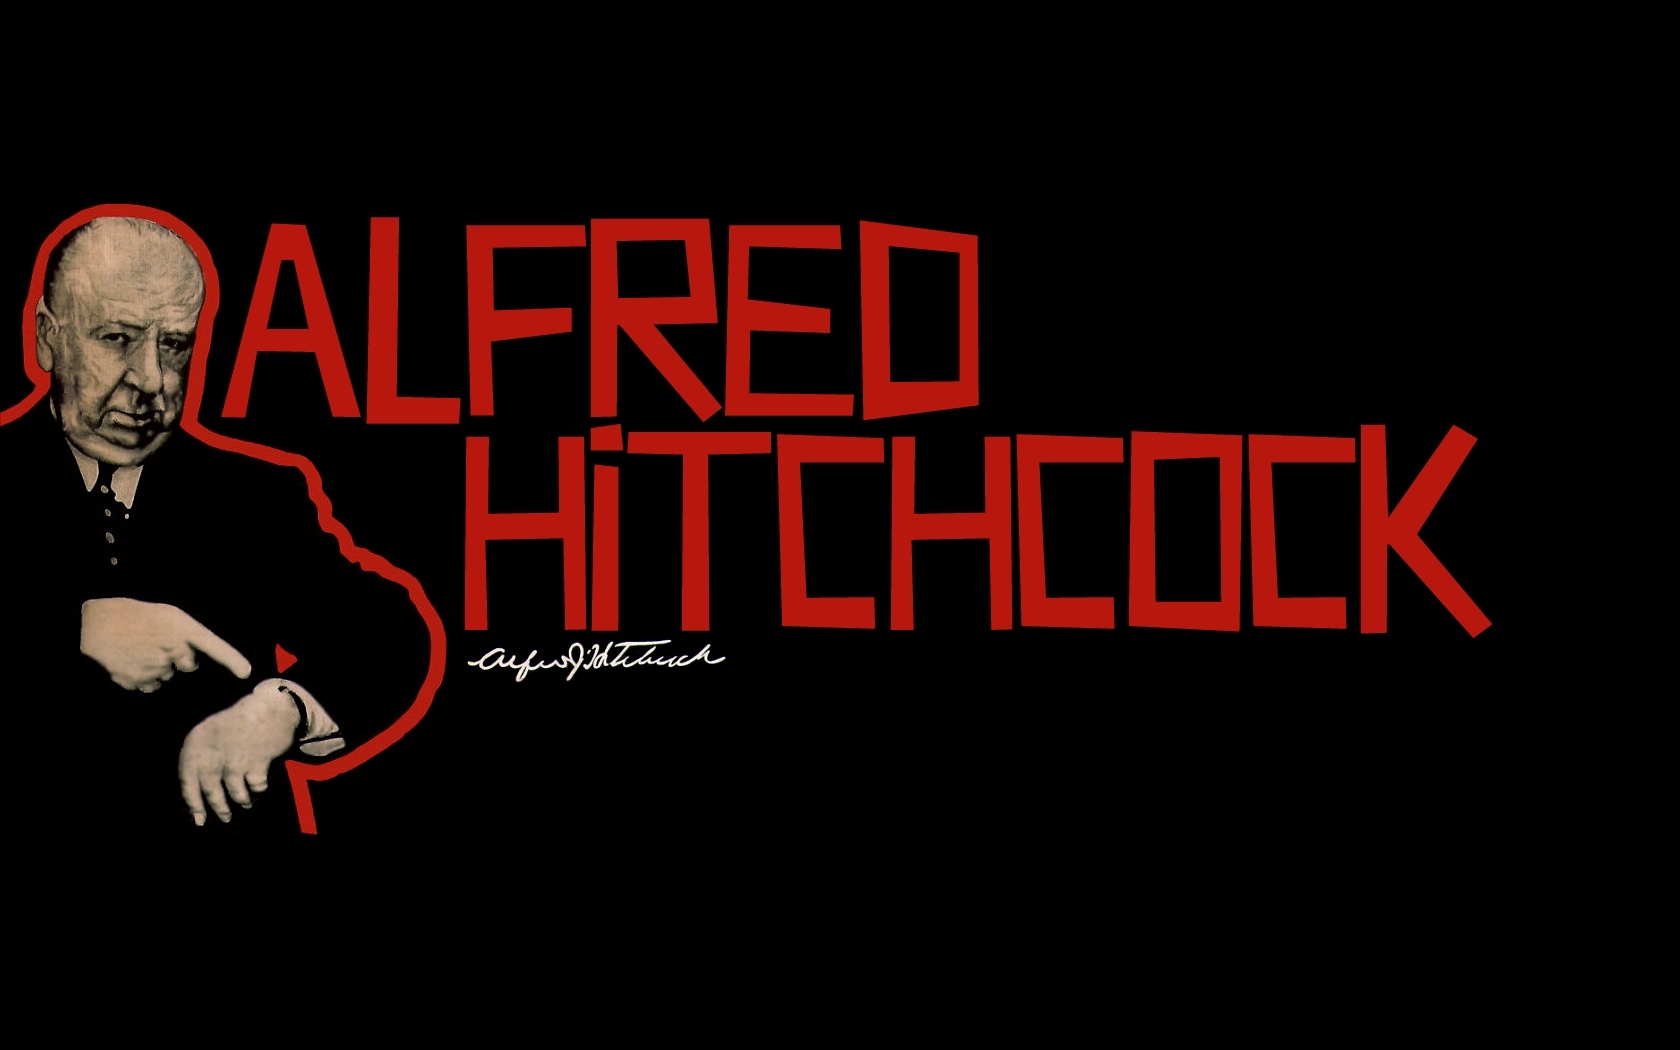 Alfred Hitchcock Image HD Wallpaper And